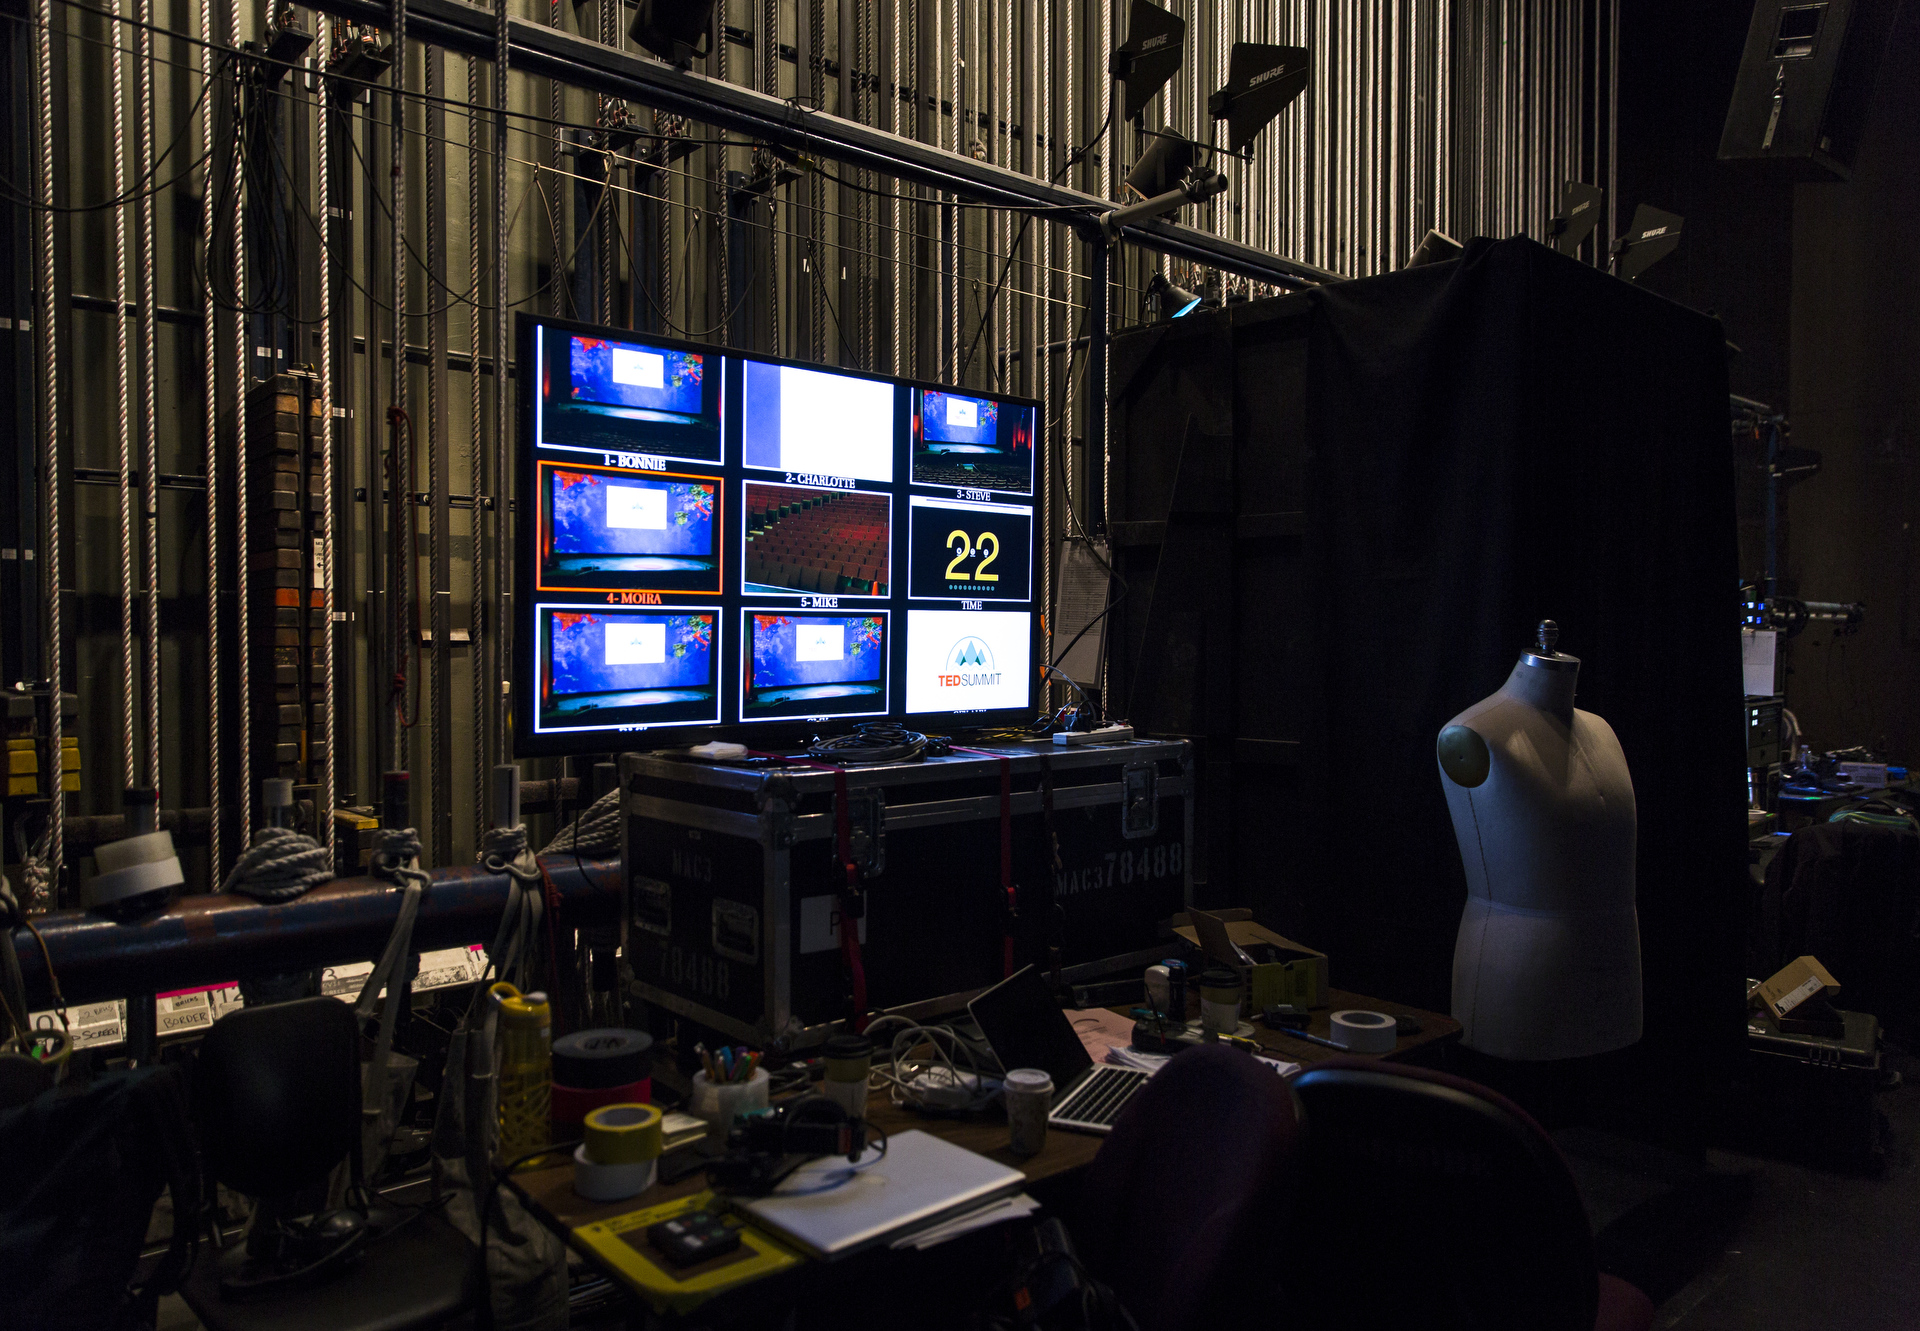 Backstage at TEDSummit 2016 in the Eric Harvie Theatre at the Banff Centre, June 26, 2016, Banff, Canada. Photo: Marla Aufmuth / TED